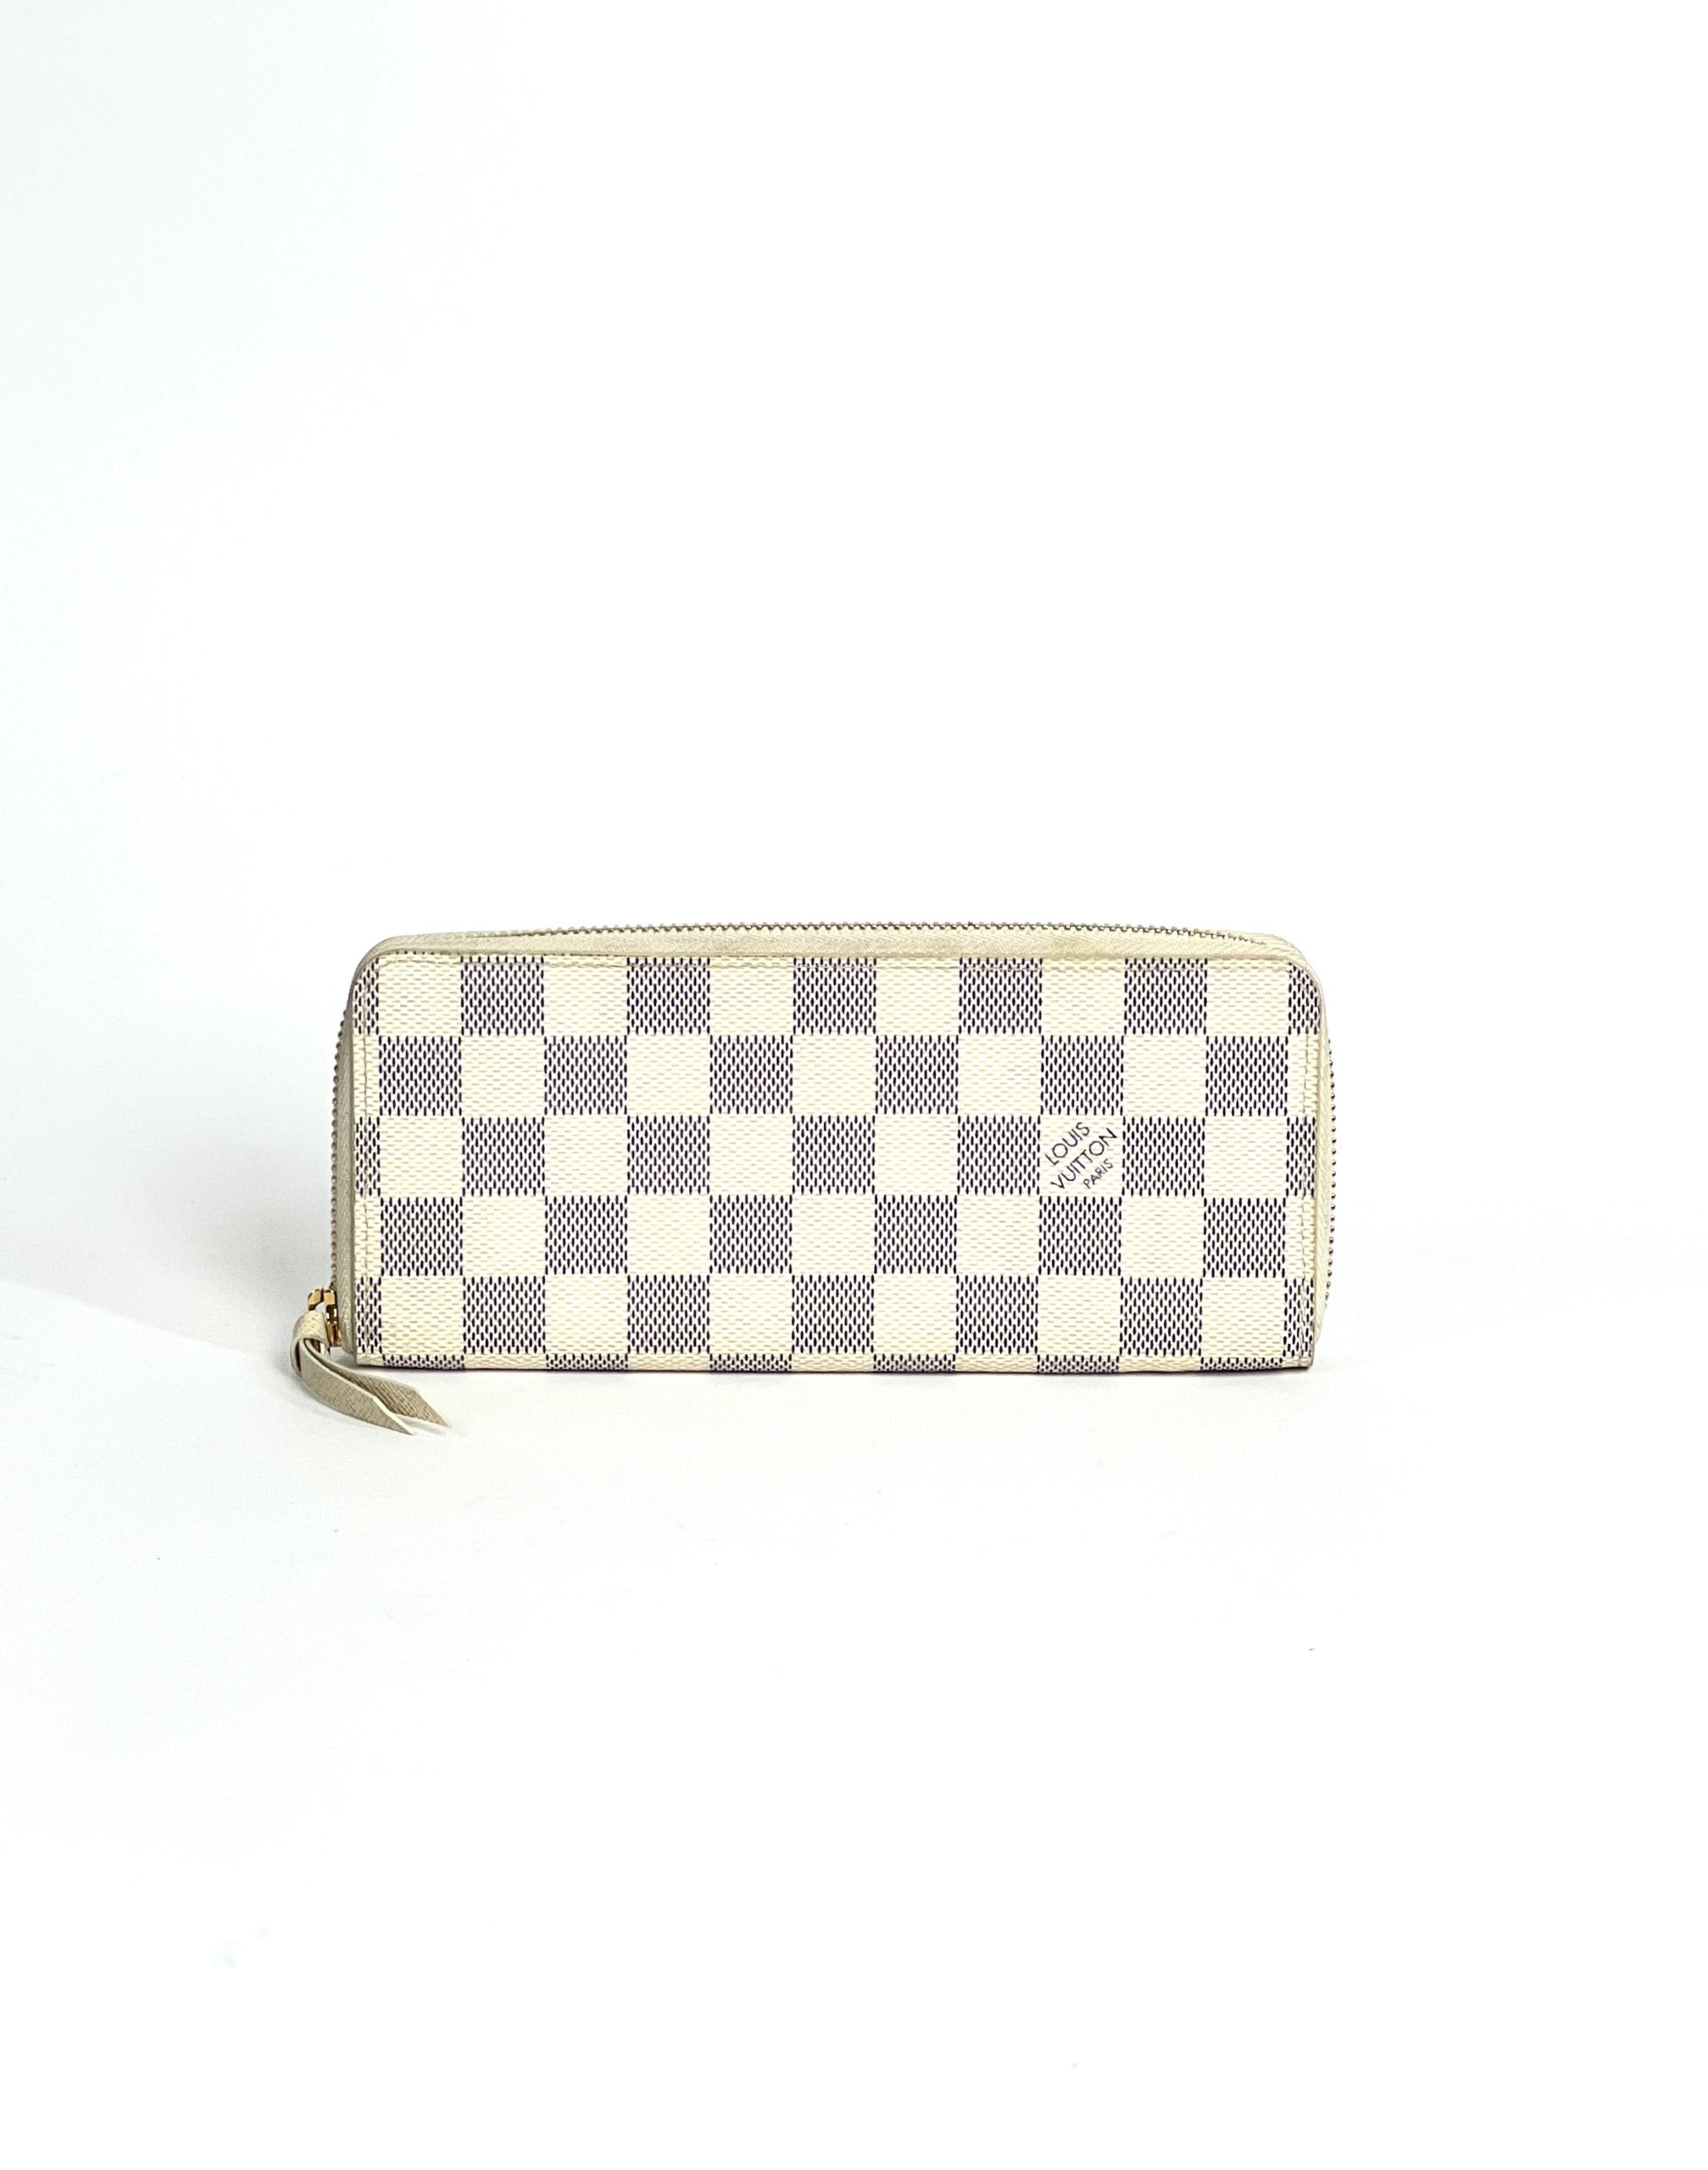 Louis Vuitton Clemence Beige Leather Wallet (Pre-Owned)